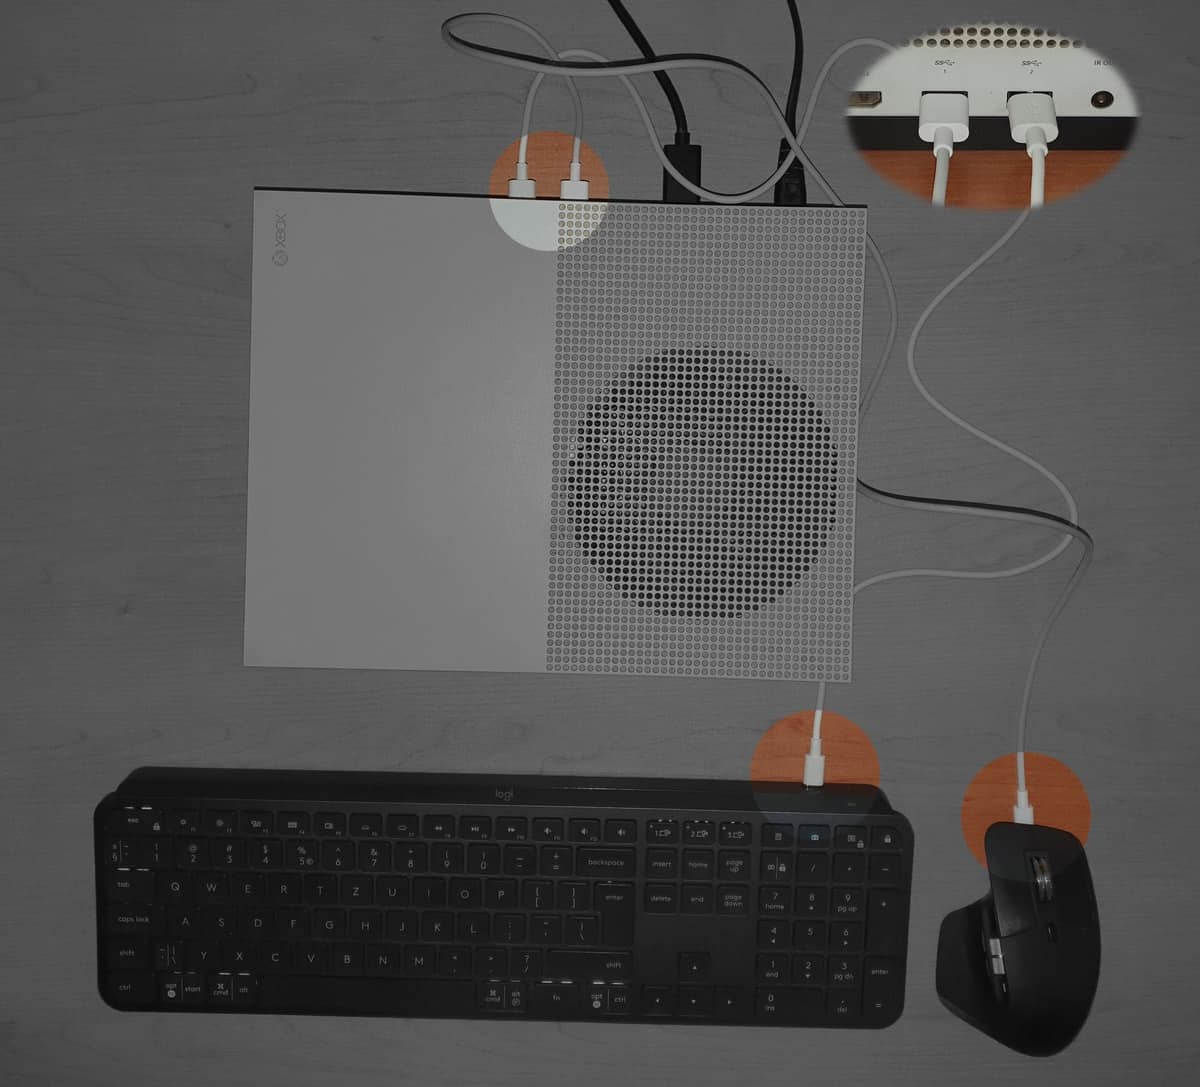 Xbox with USB keyboard and mouse plugged in